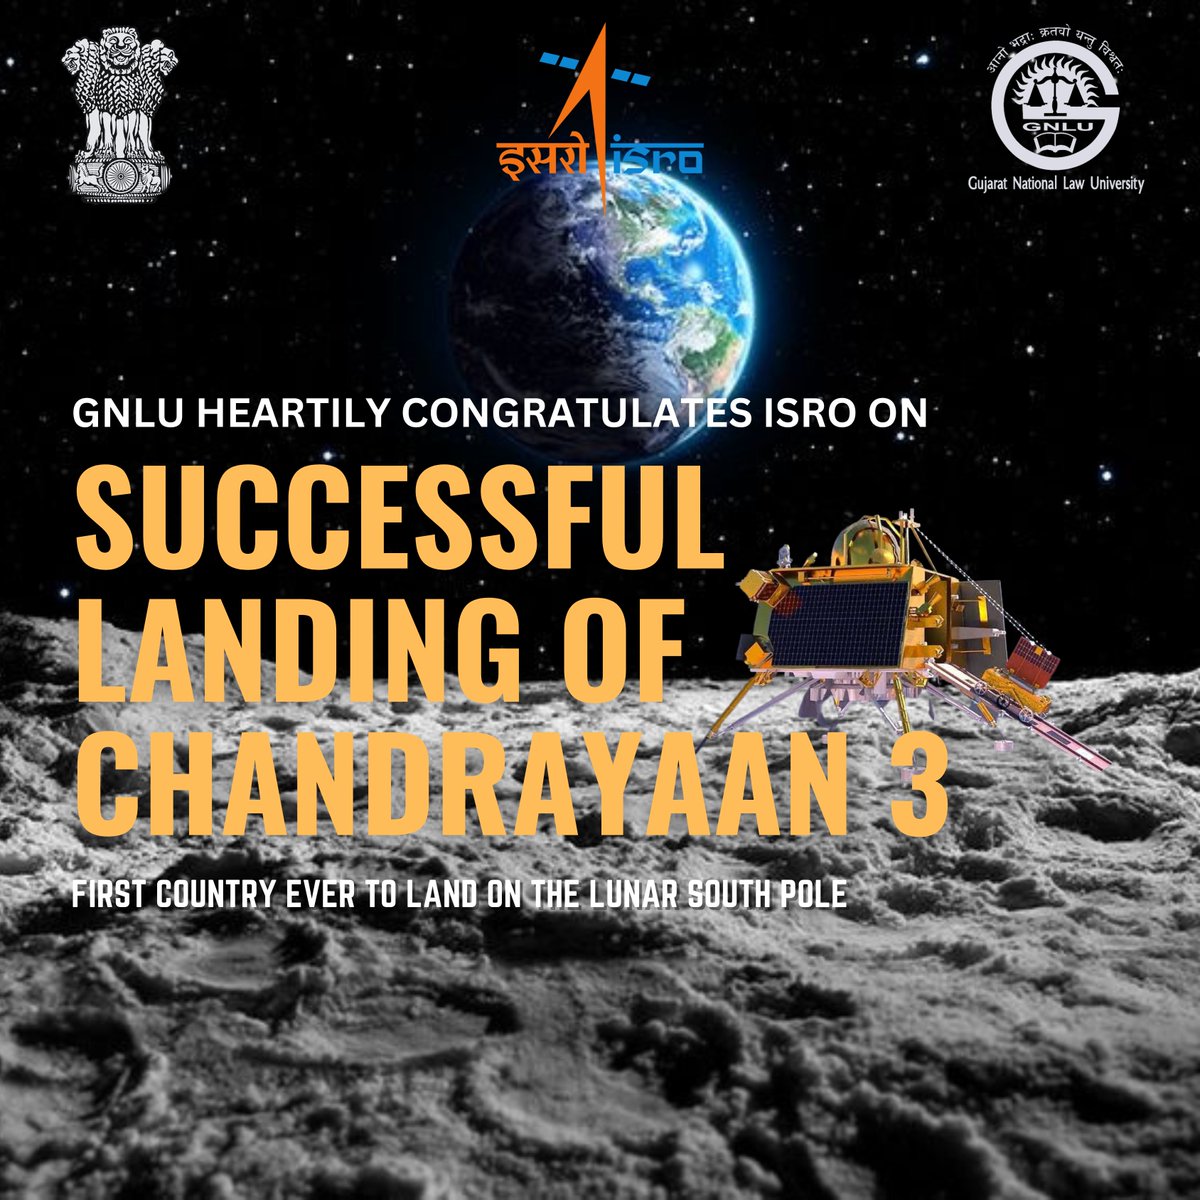 Proud moment of all Indians, the successful landing of Chandrayaan-3 fills us with immense pride! It showcases the brilliance of our scientists & the unbreakable spirit of our people. Let's keep reaching for the stars and making India's presence shine worldwide.🇮🇳 #Chandrayaan3